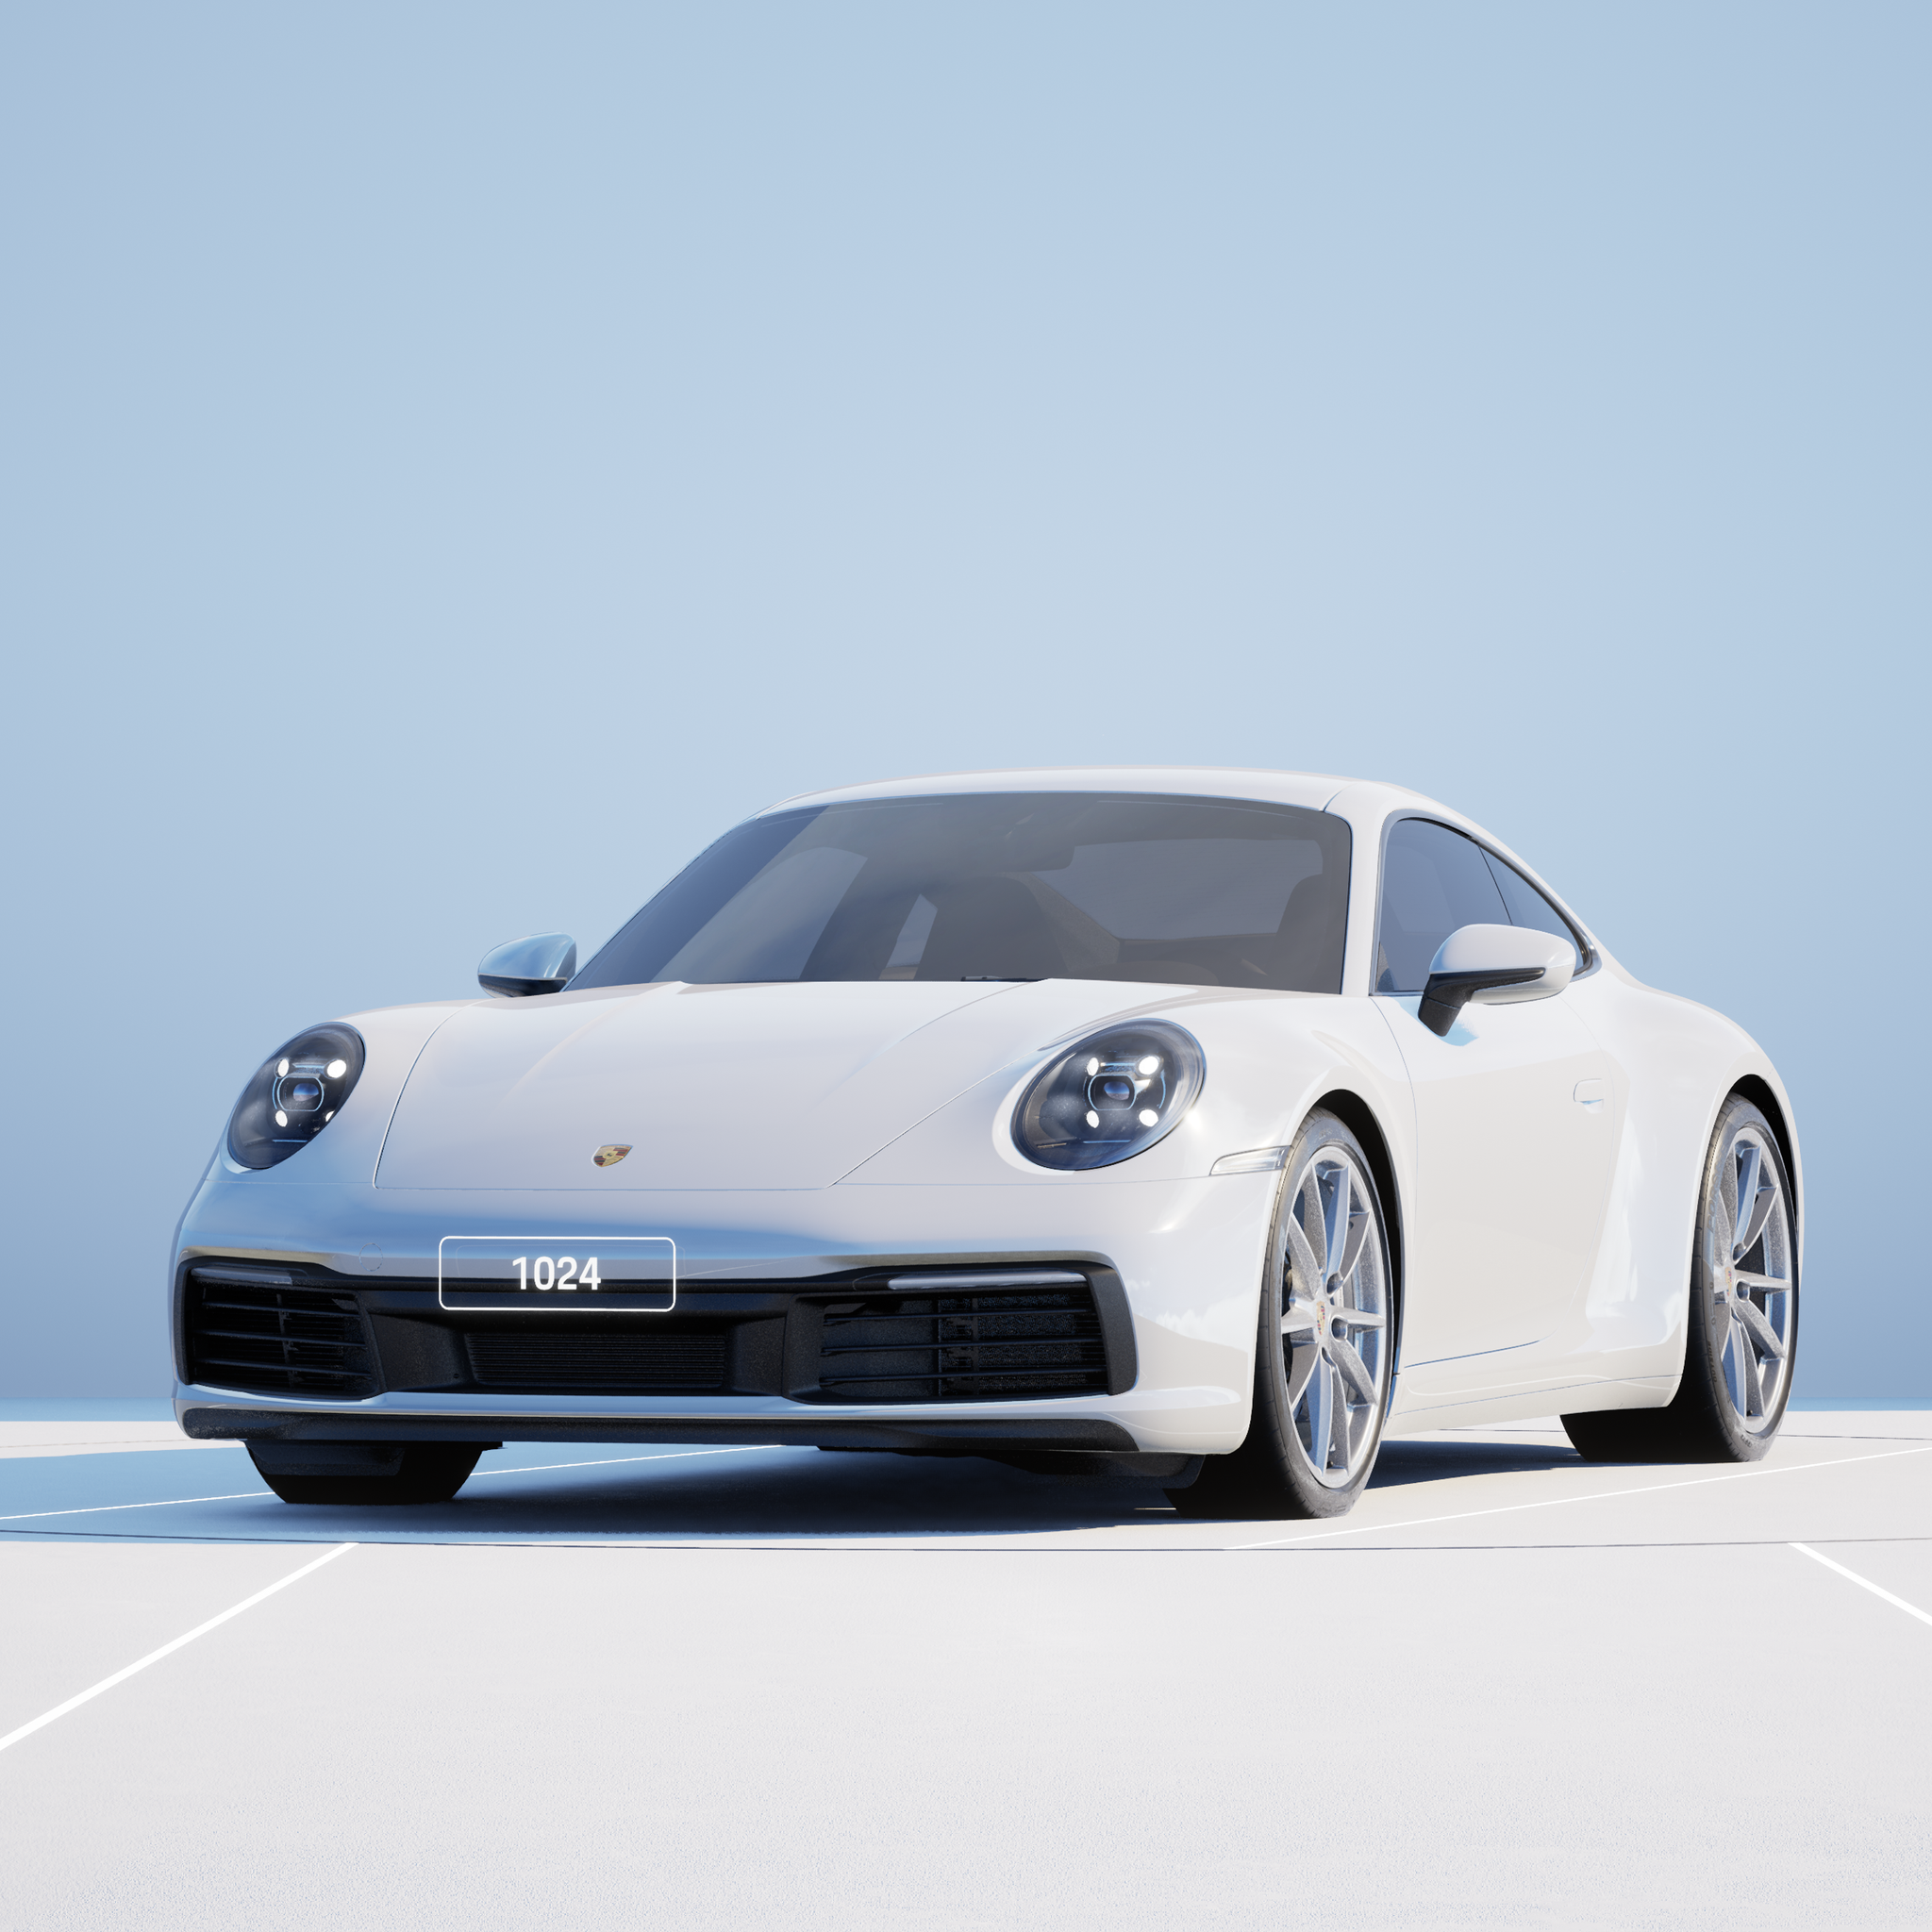 The PORSCHΞ 911 1024 image in phase